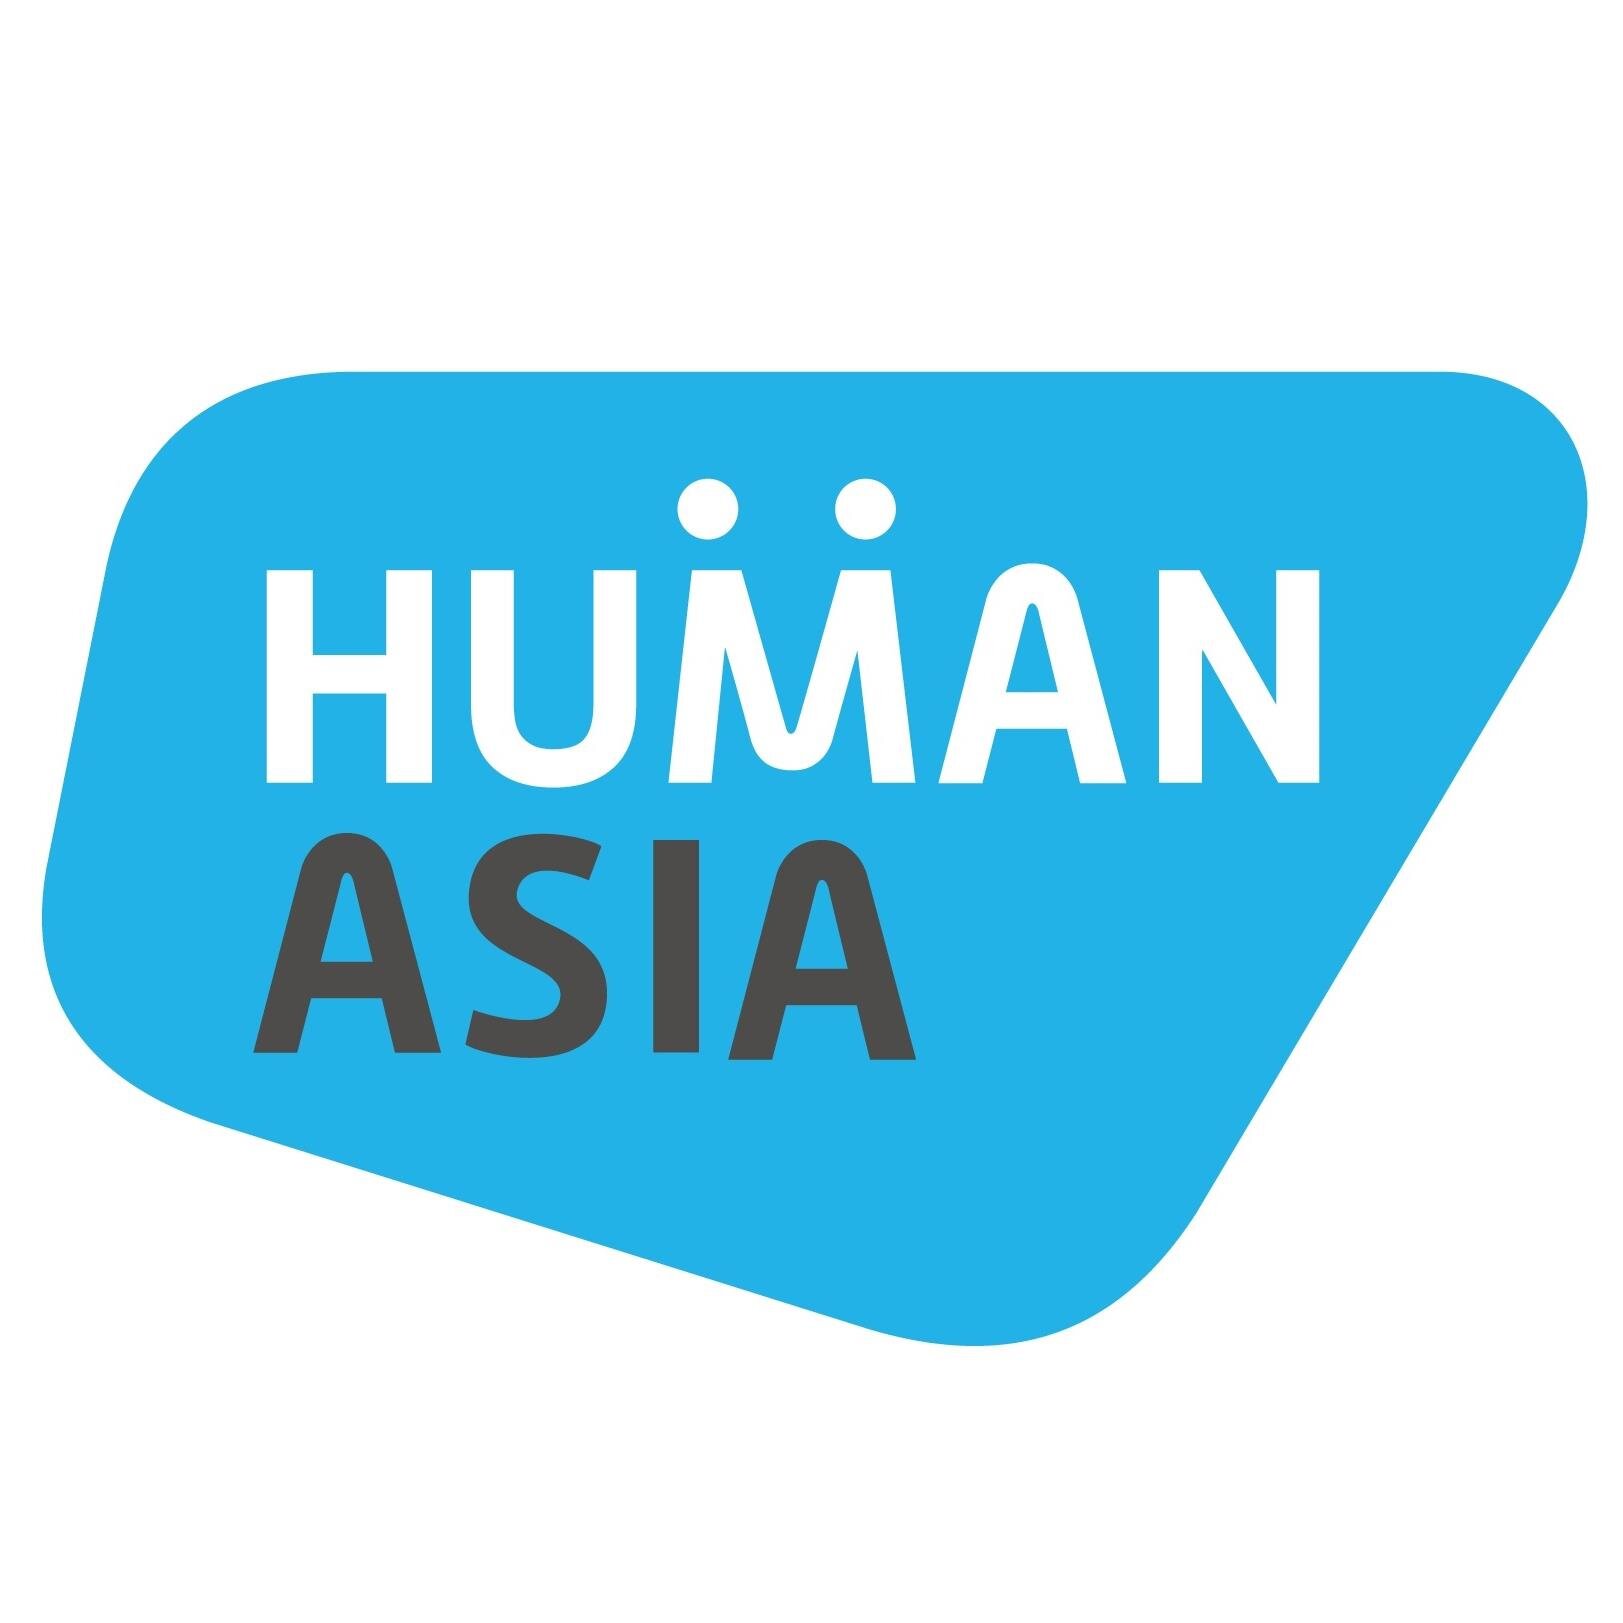 Founded in January 2006, Human Asia is striving to establish a regional human rights protection system in Asia.